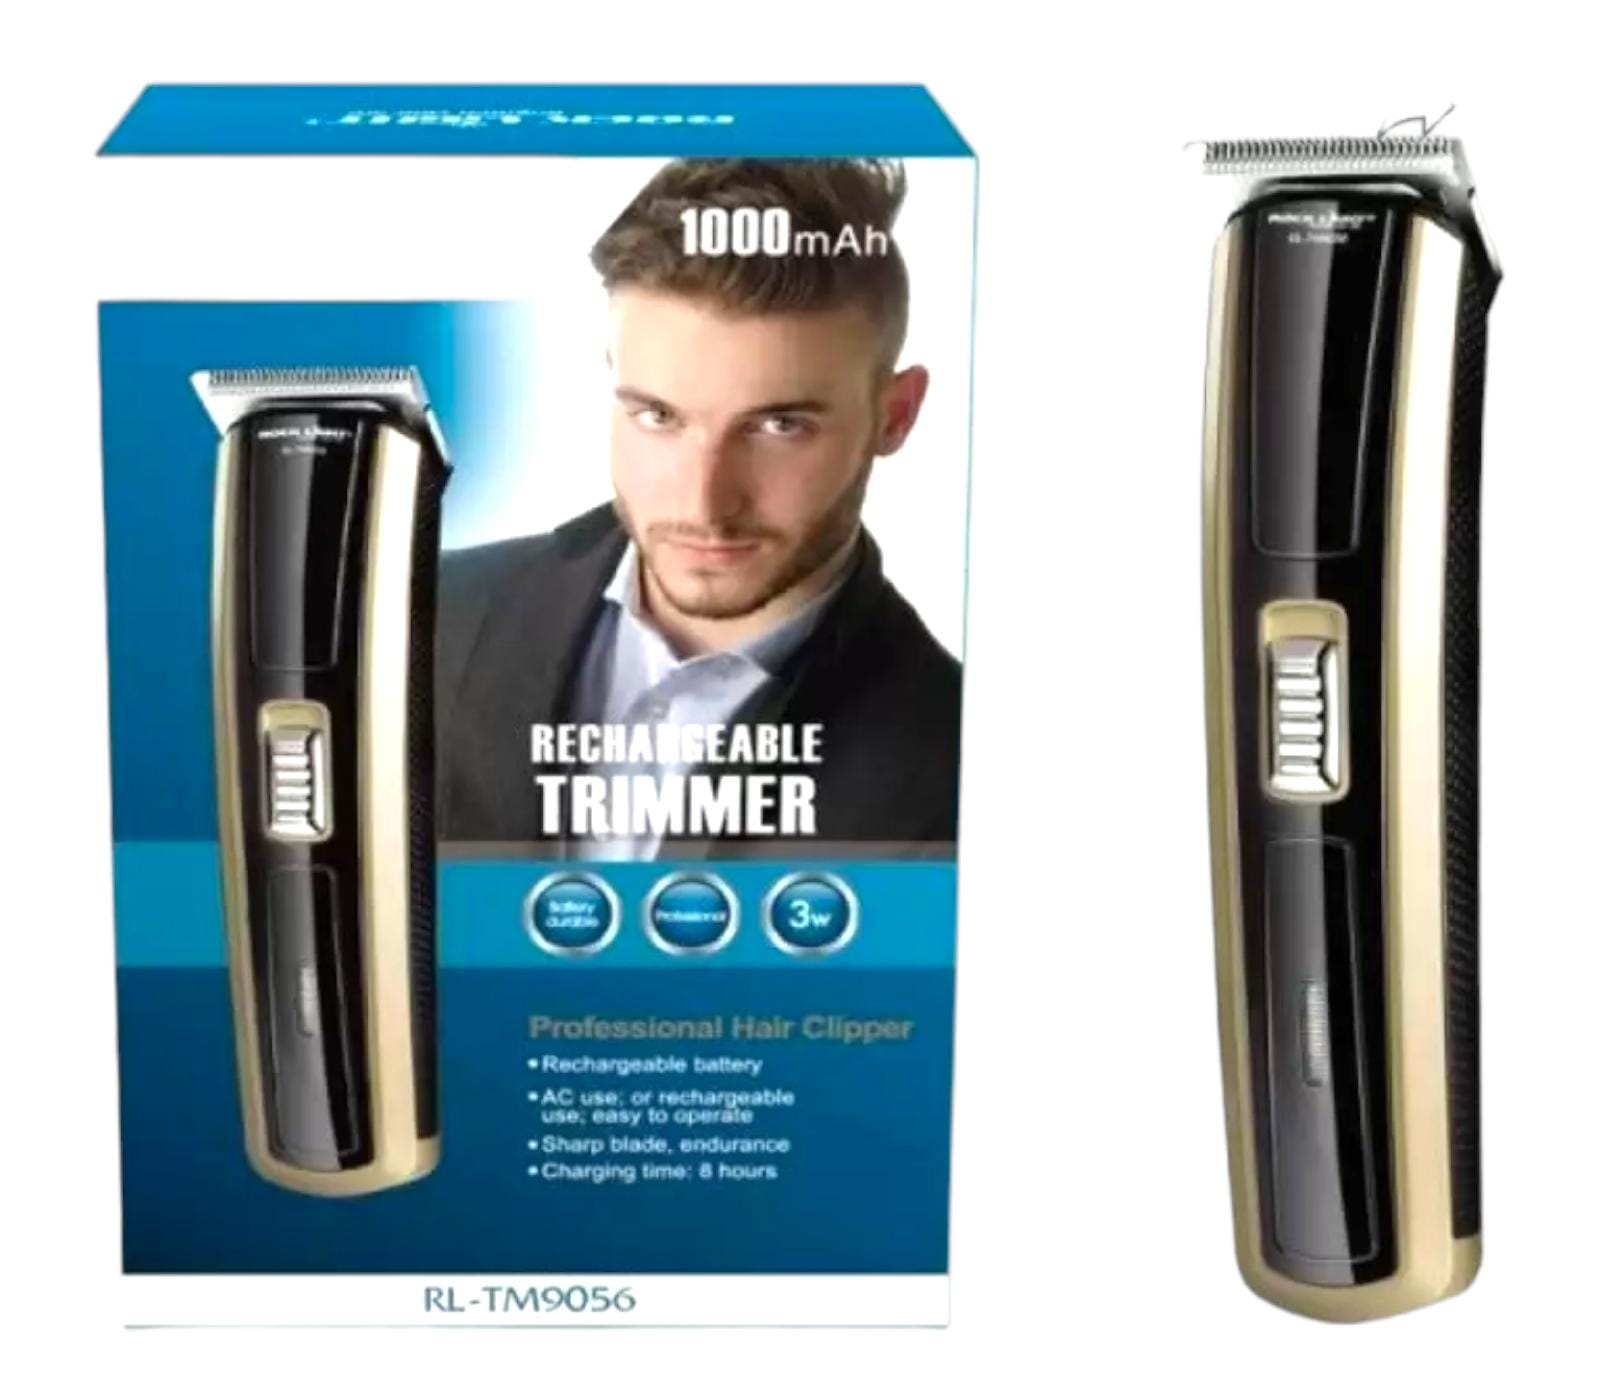  Professional Rechargeable Hair Clipper